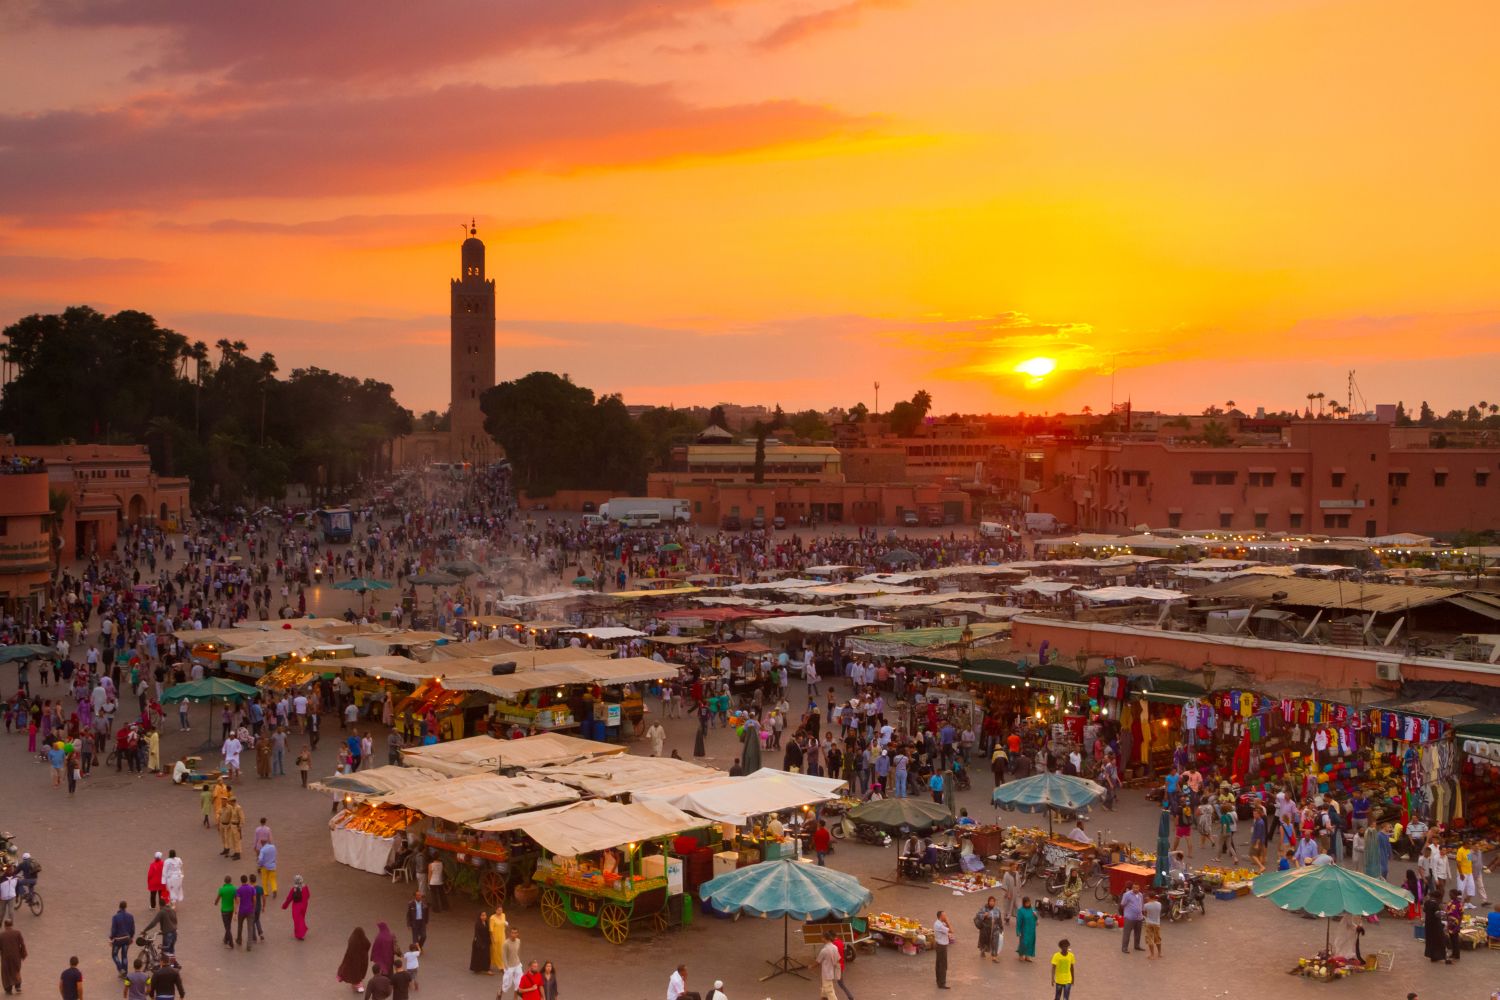 Busy crowds in Jemaa el Fna medina square and markeplace